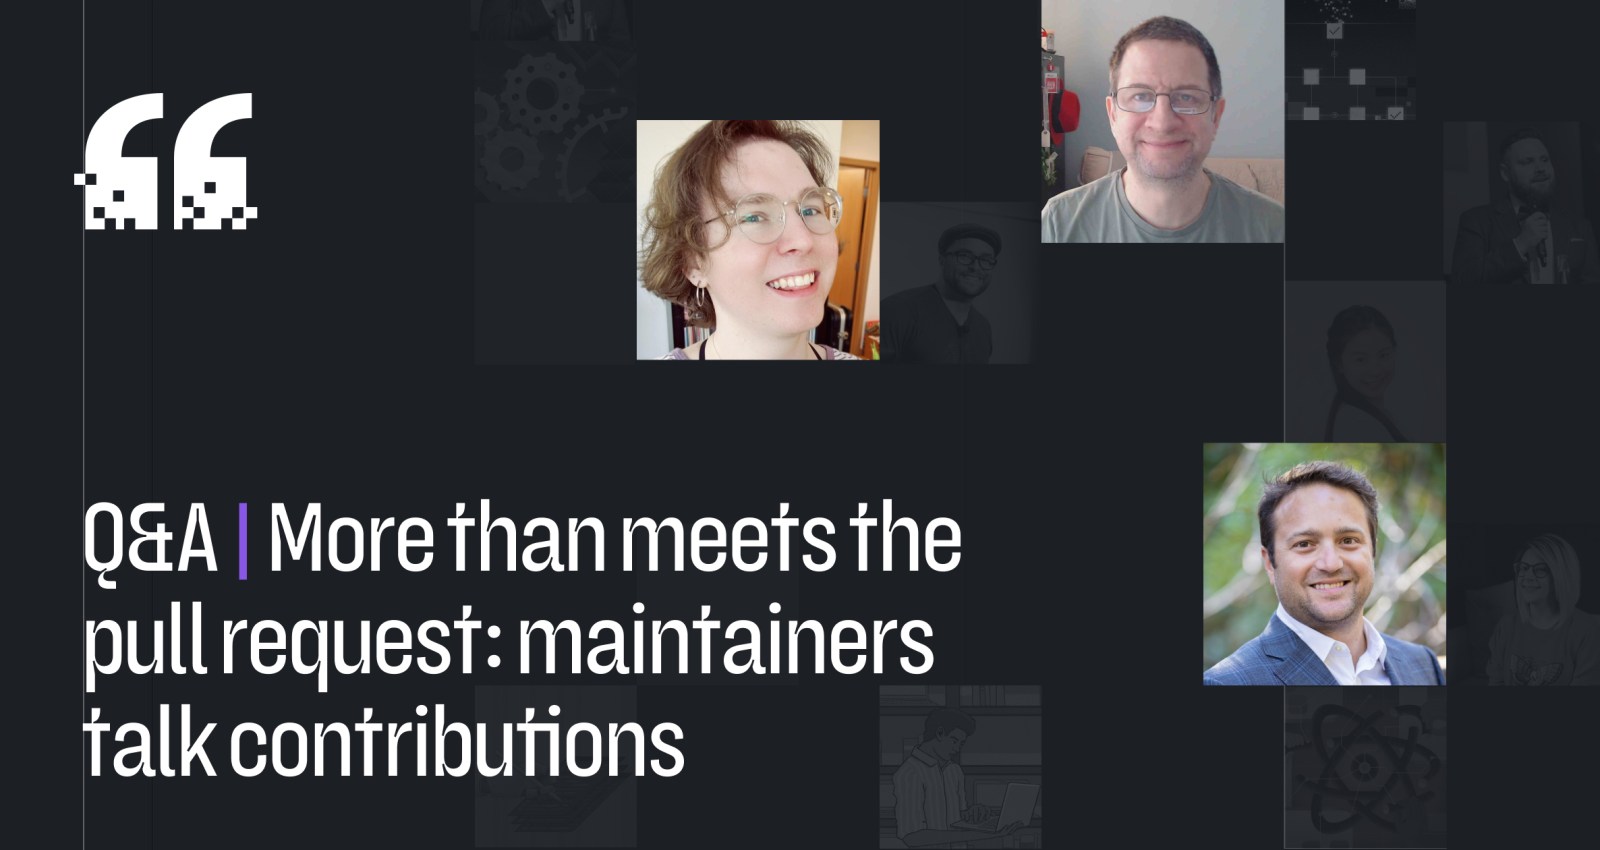 More than meets the pull request: maintainers talk contributions